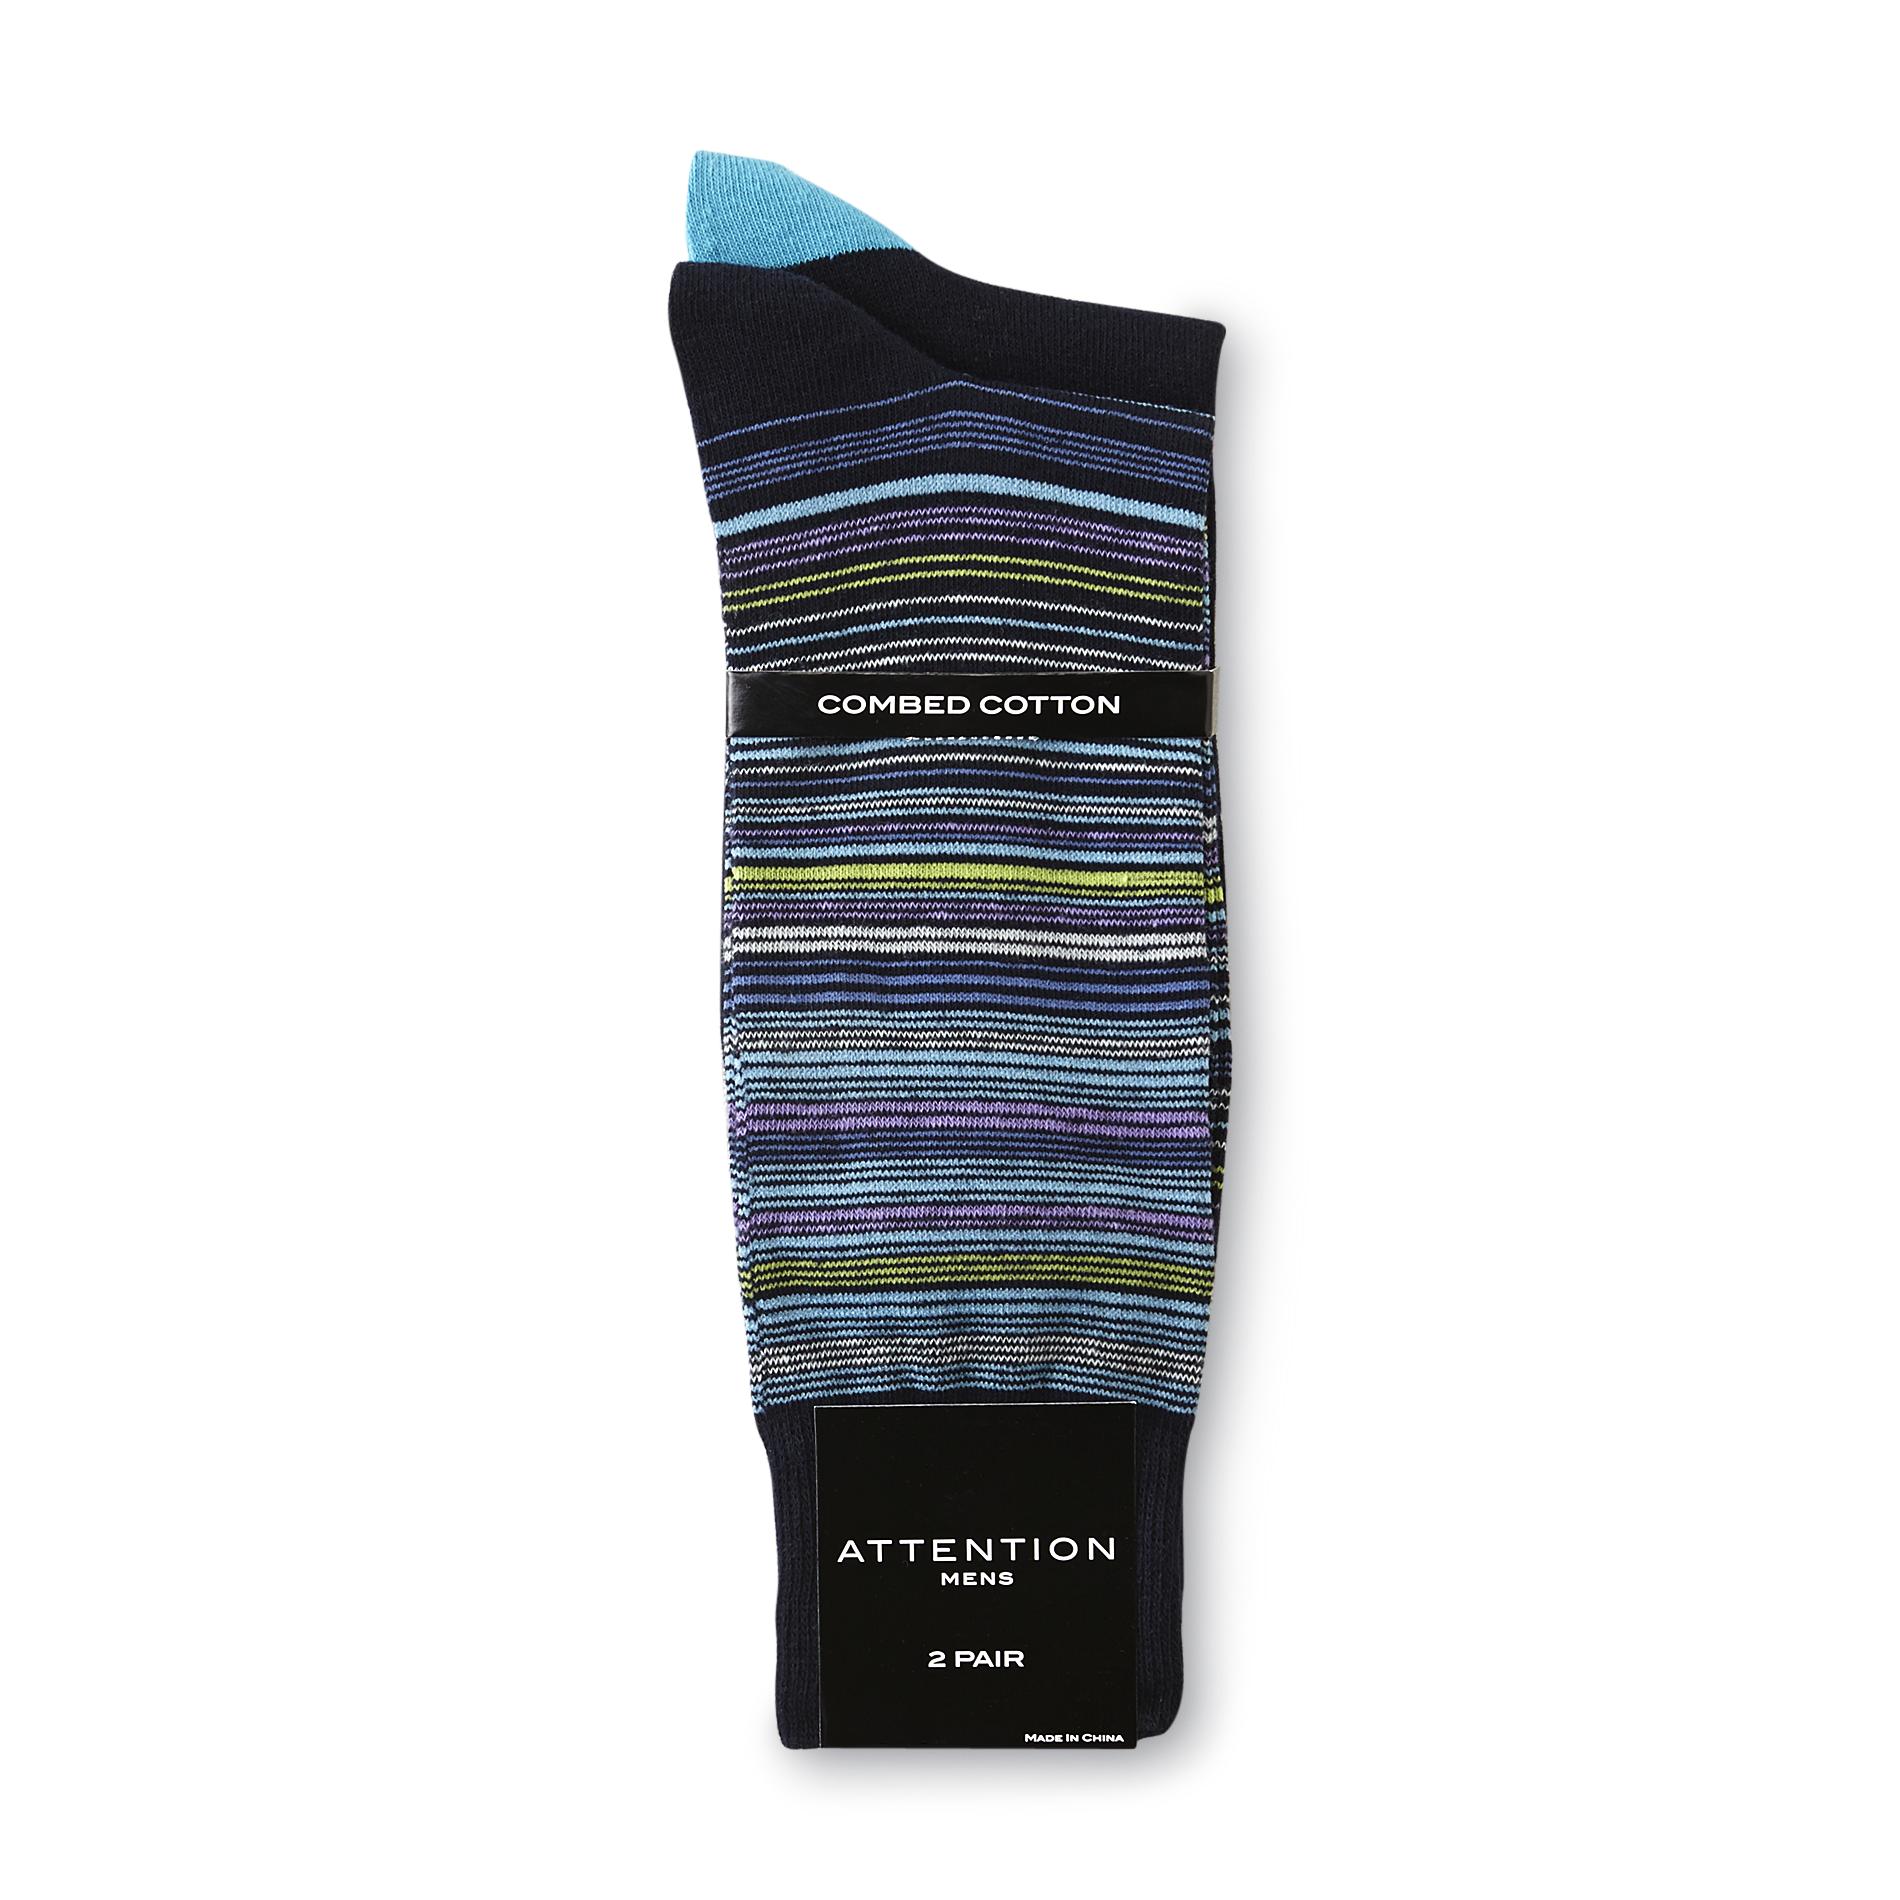 Attention Men's 2-Pairs Combed Cotton Socks - Striped/Solid